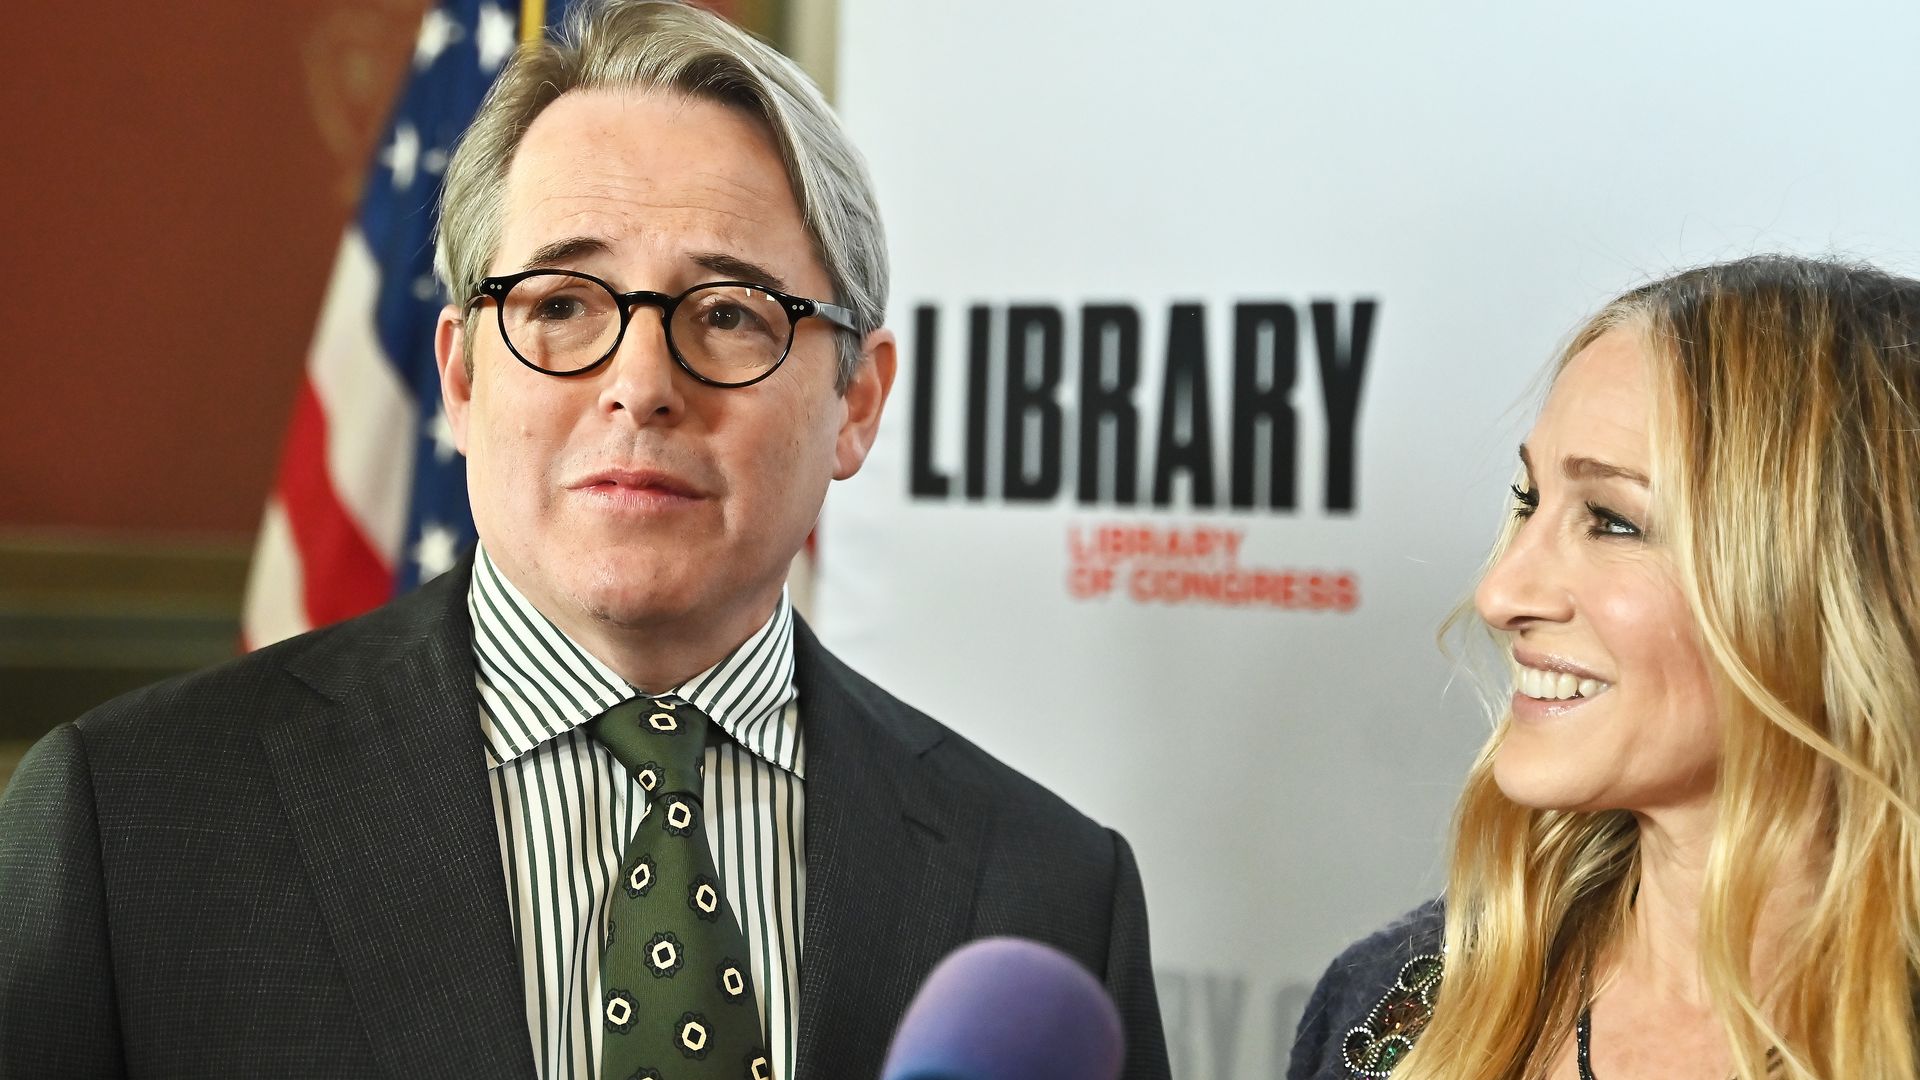 Matthew Broderick and Sarah Jessica Parker speaking at an event